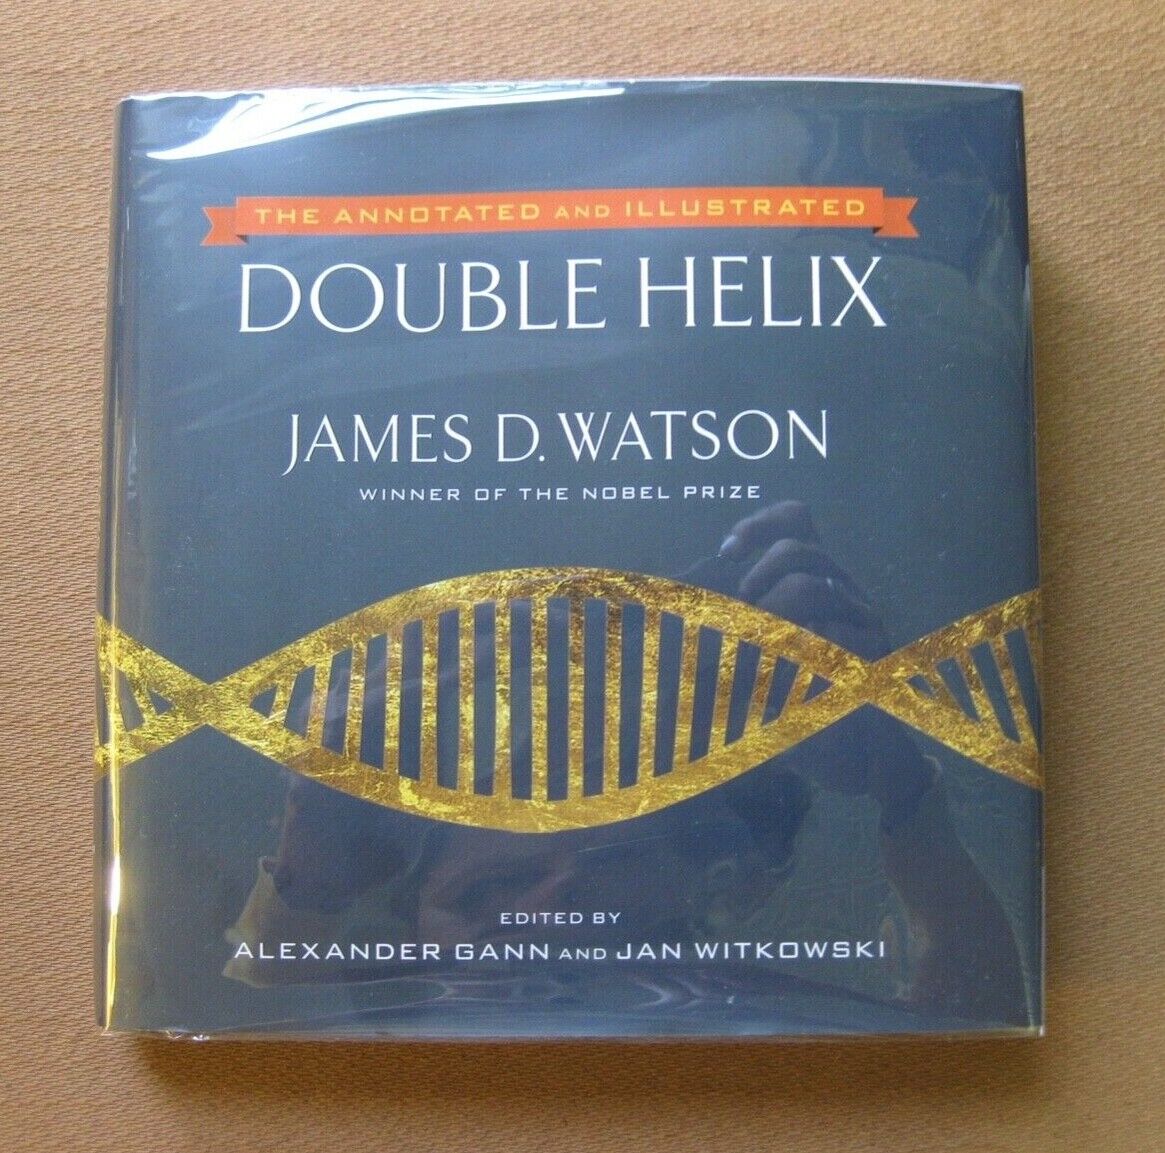  SIGNED - DOUBLE HELIX annotated by James D. Watson -1st HCDJ 2012 - Nobel Prize